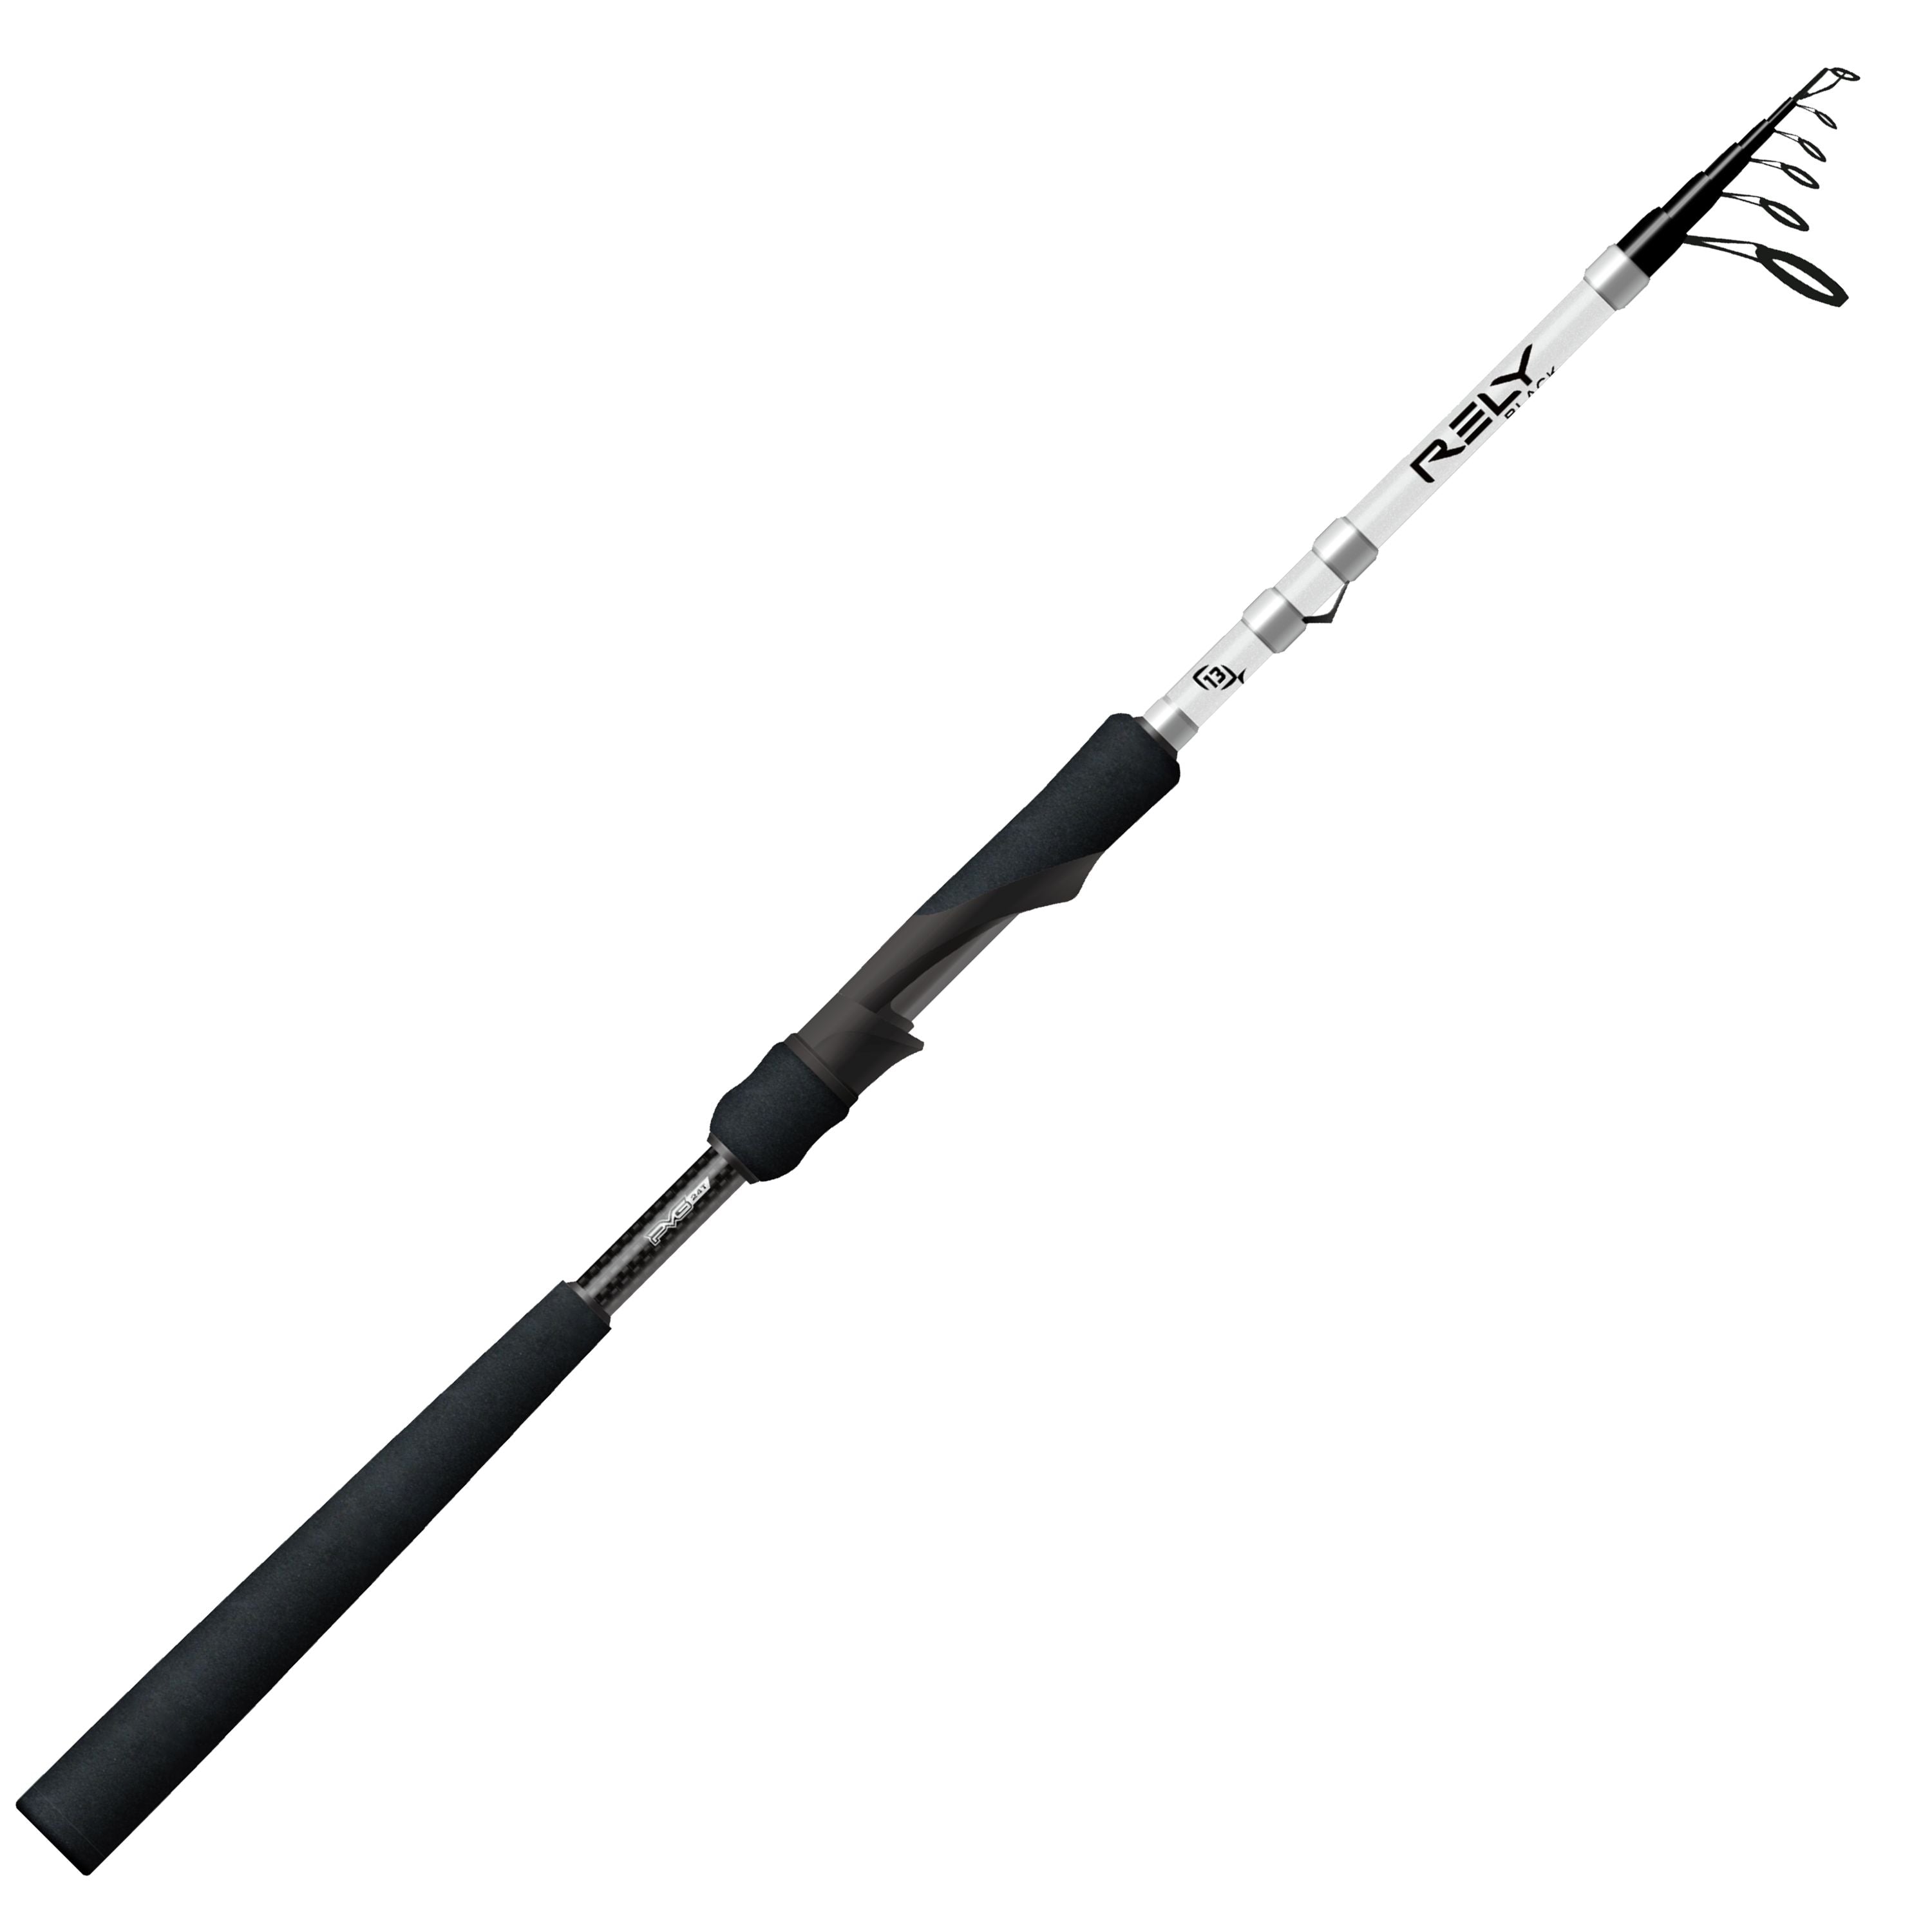 "Rely Black" Telescopic spinning rod